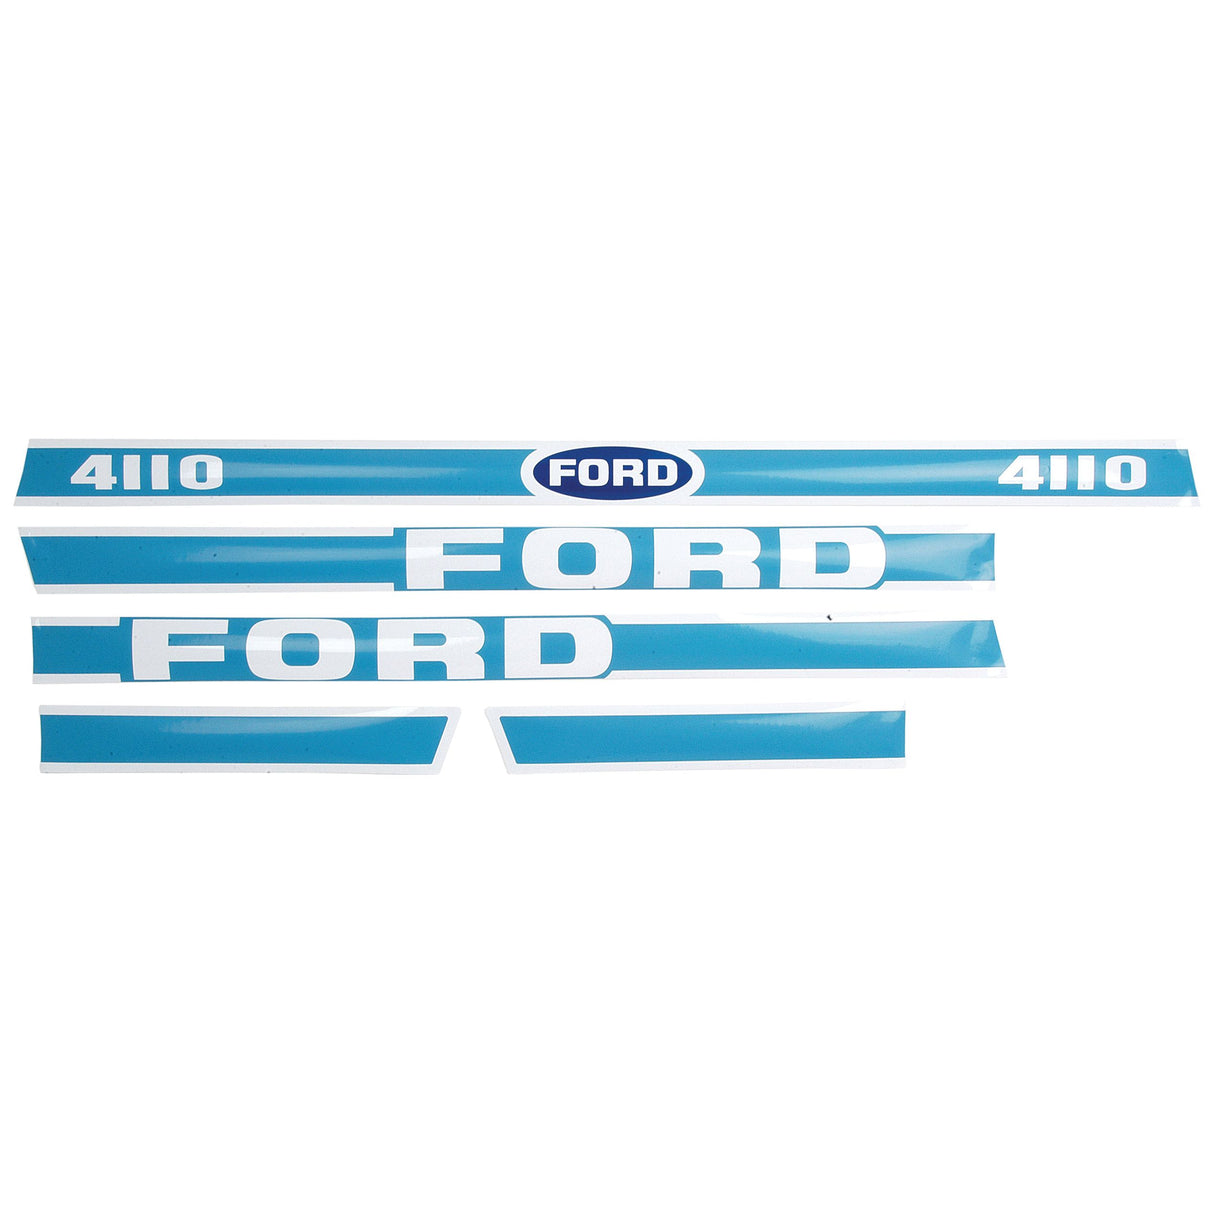 Decal Set - Ford / New Holland 4110
 - S.8427 - Farming Parts